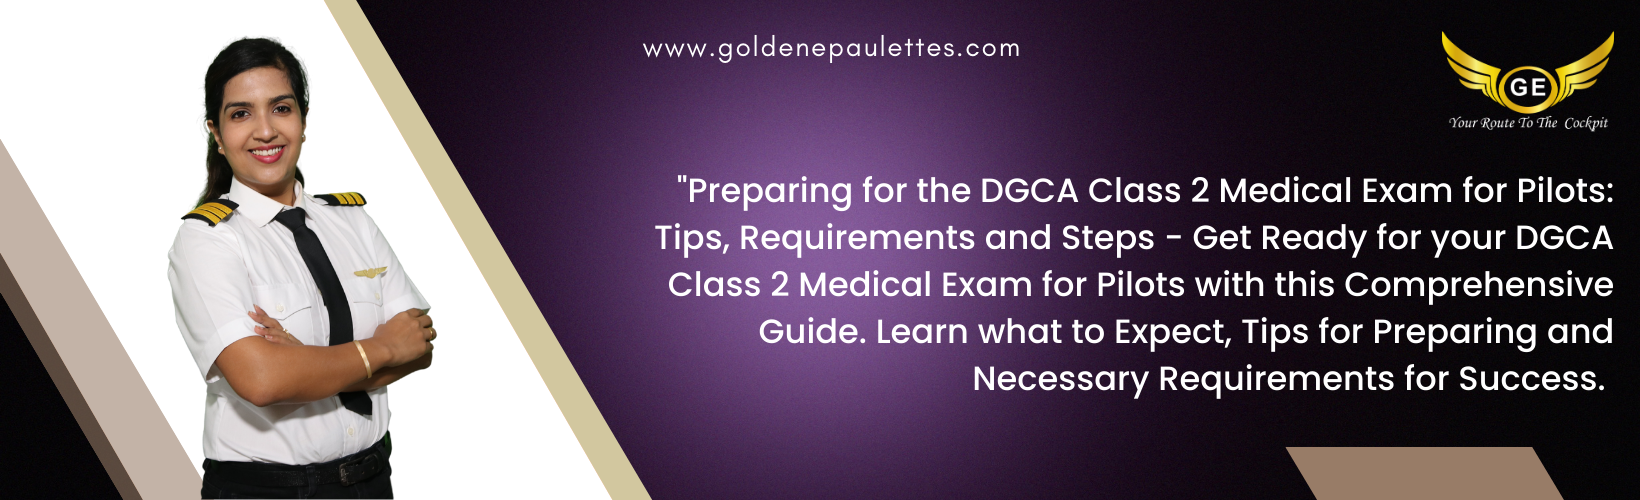 How to Prepare for a DGCA Class 2 Medical Exam for Pilots - This article will provide an overview of the requirements and steps to take to pass the DGCA Class 2 Medical Exam for Pilots. It will also provide tips on how to prepare for the exam. (Reference